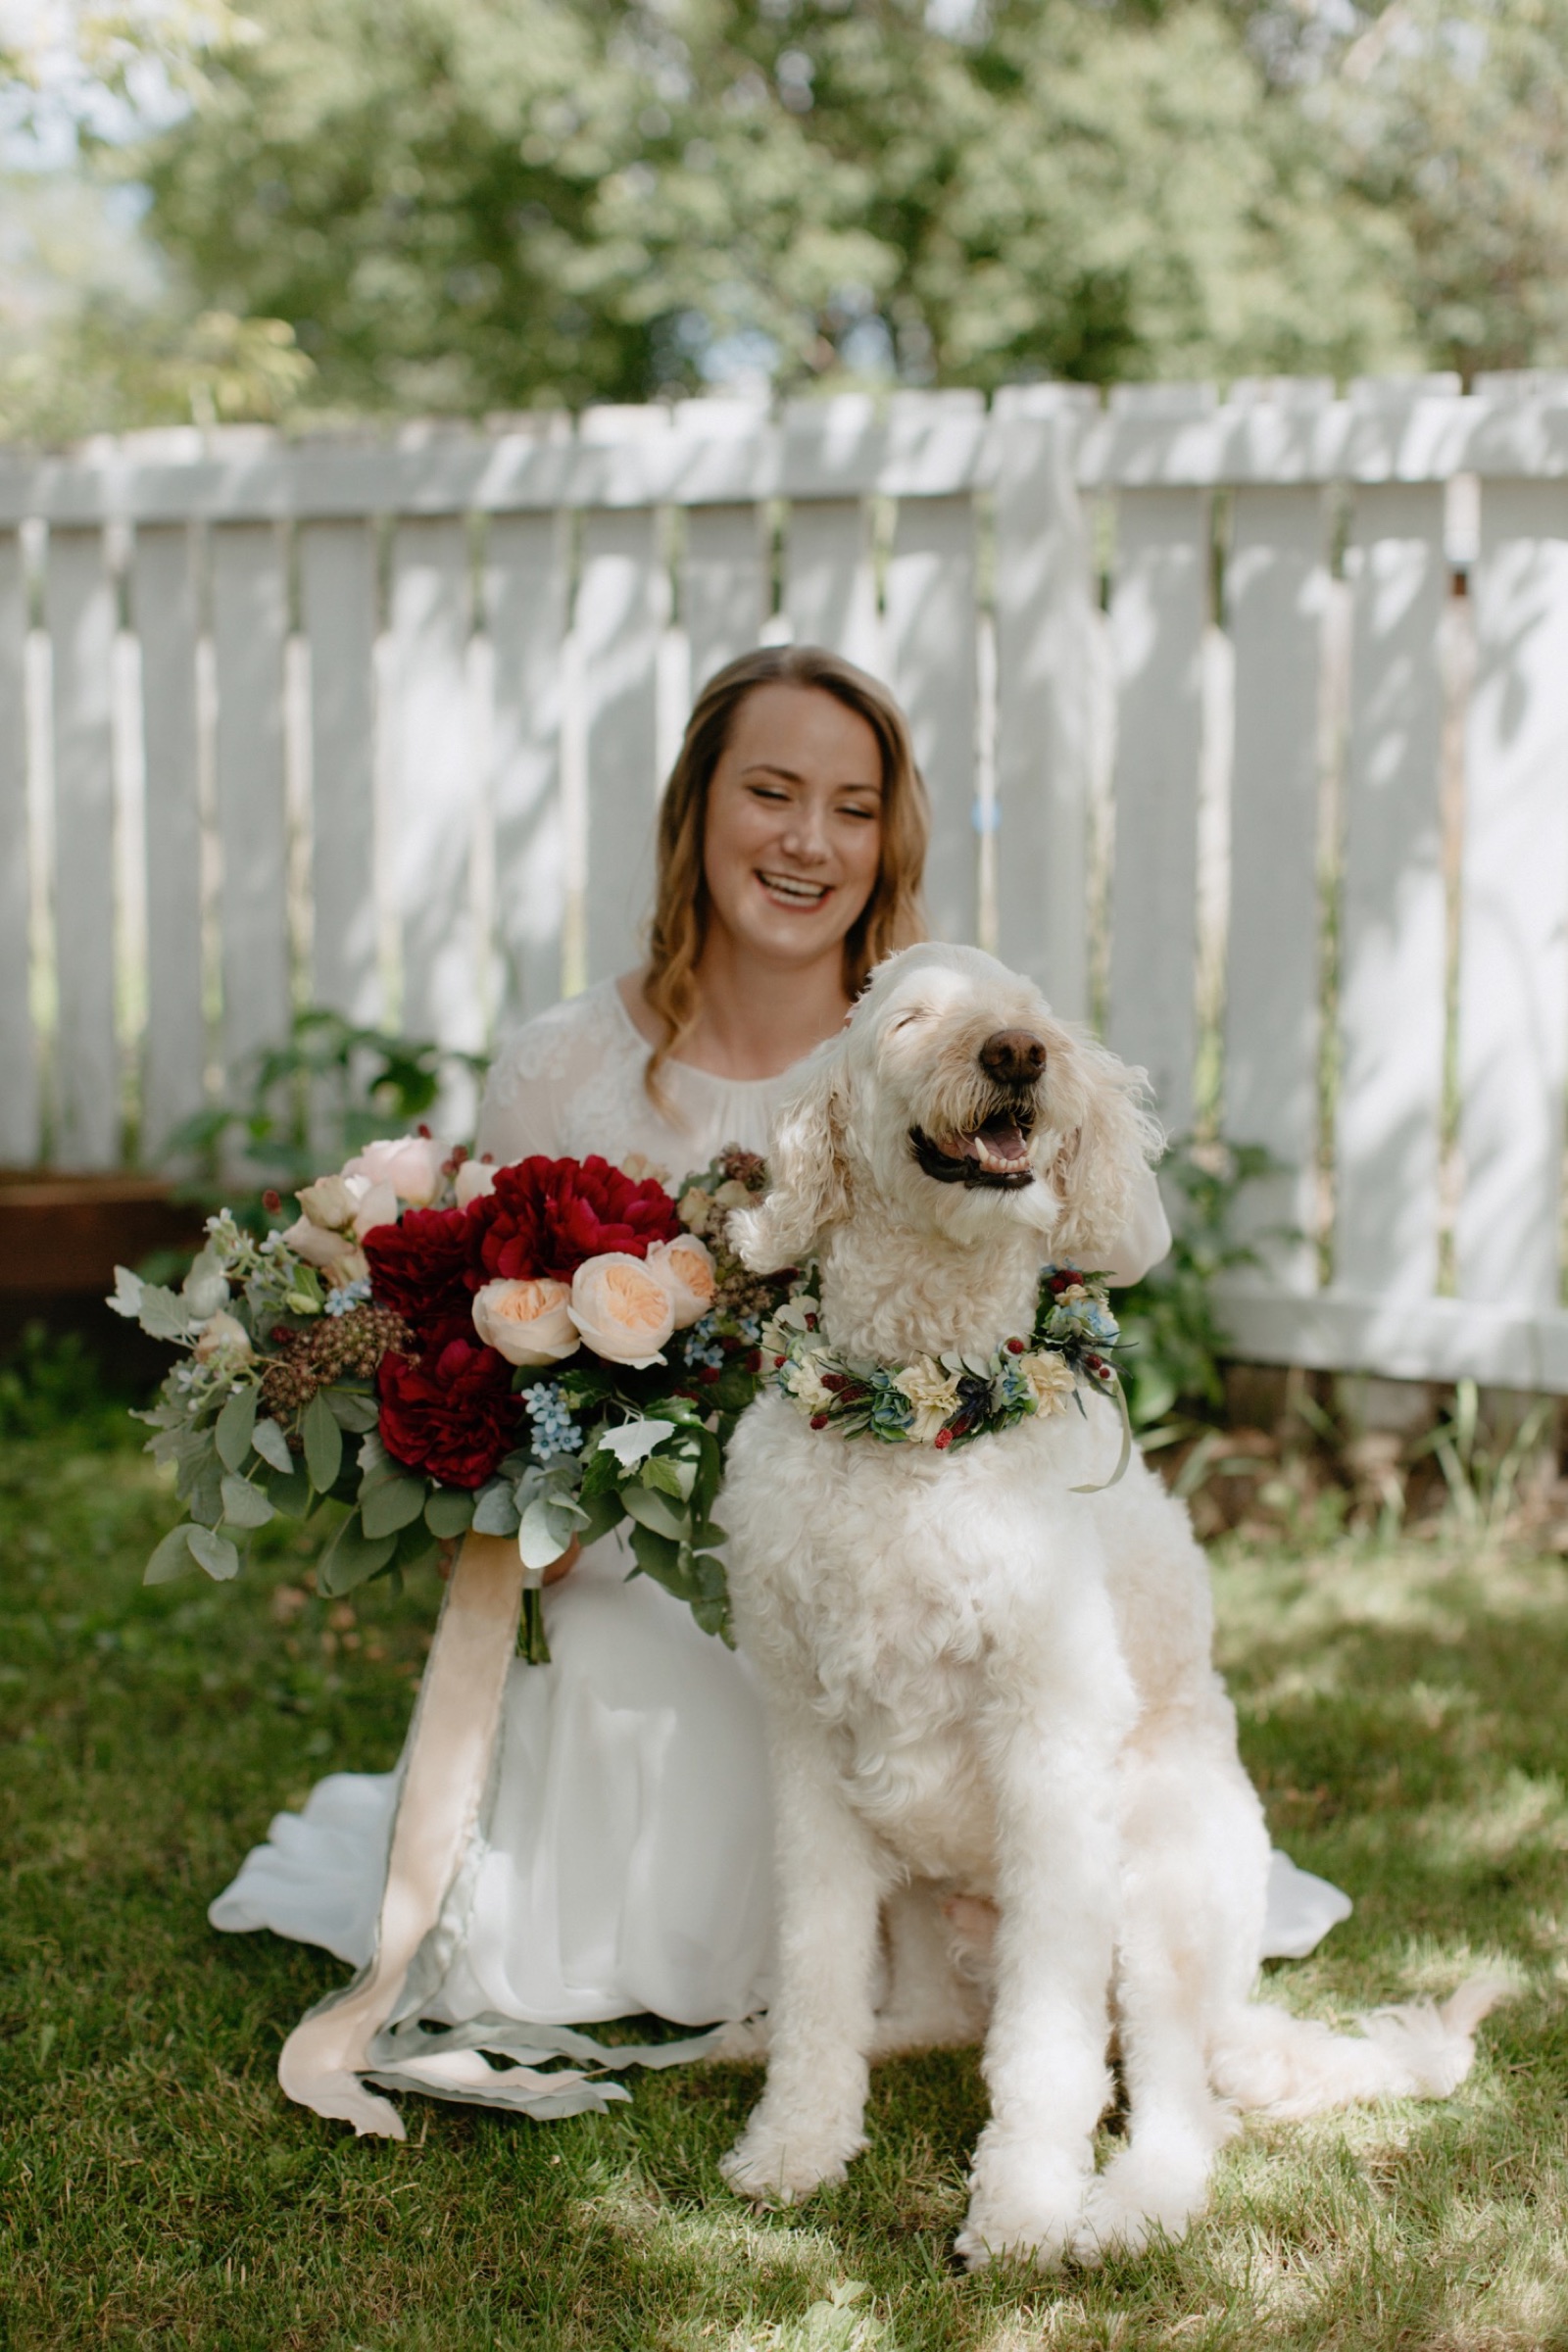 Bride and her oh so happy dog wearing a floral collar in her backyard before the ceremony